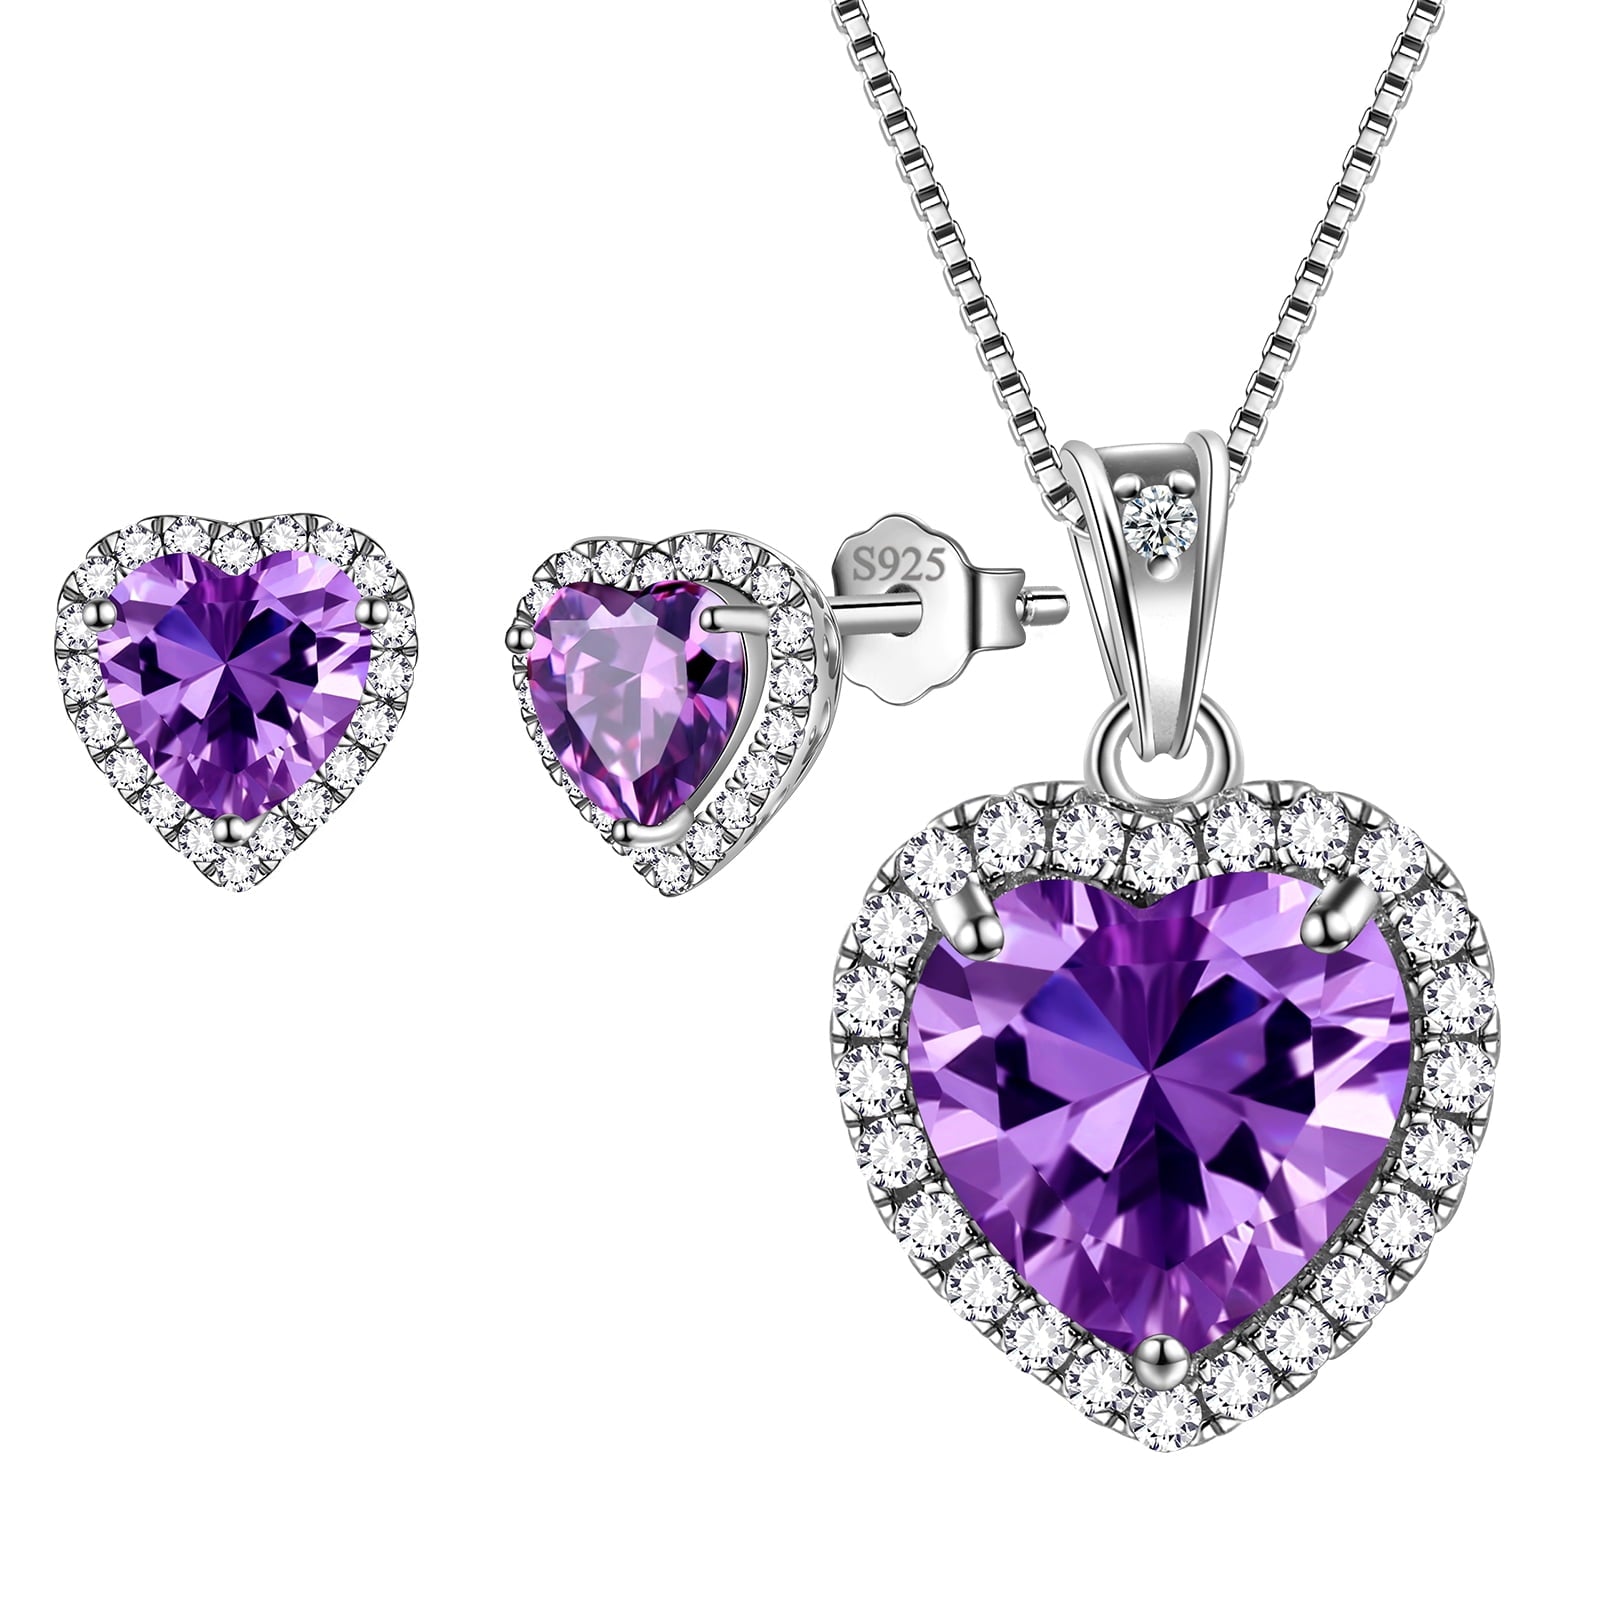 Purple Heart Jewelry Sets for Women, Amethyst February Birthstone Jewelry Set Necklace Earrings 925 Sterling Silver Jewelry Girls Birthday Valentine's Day Gifts